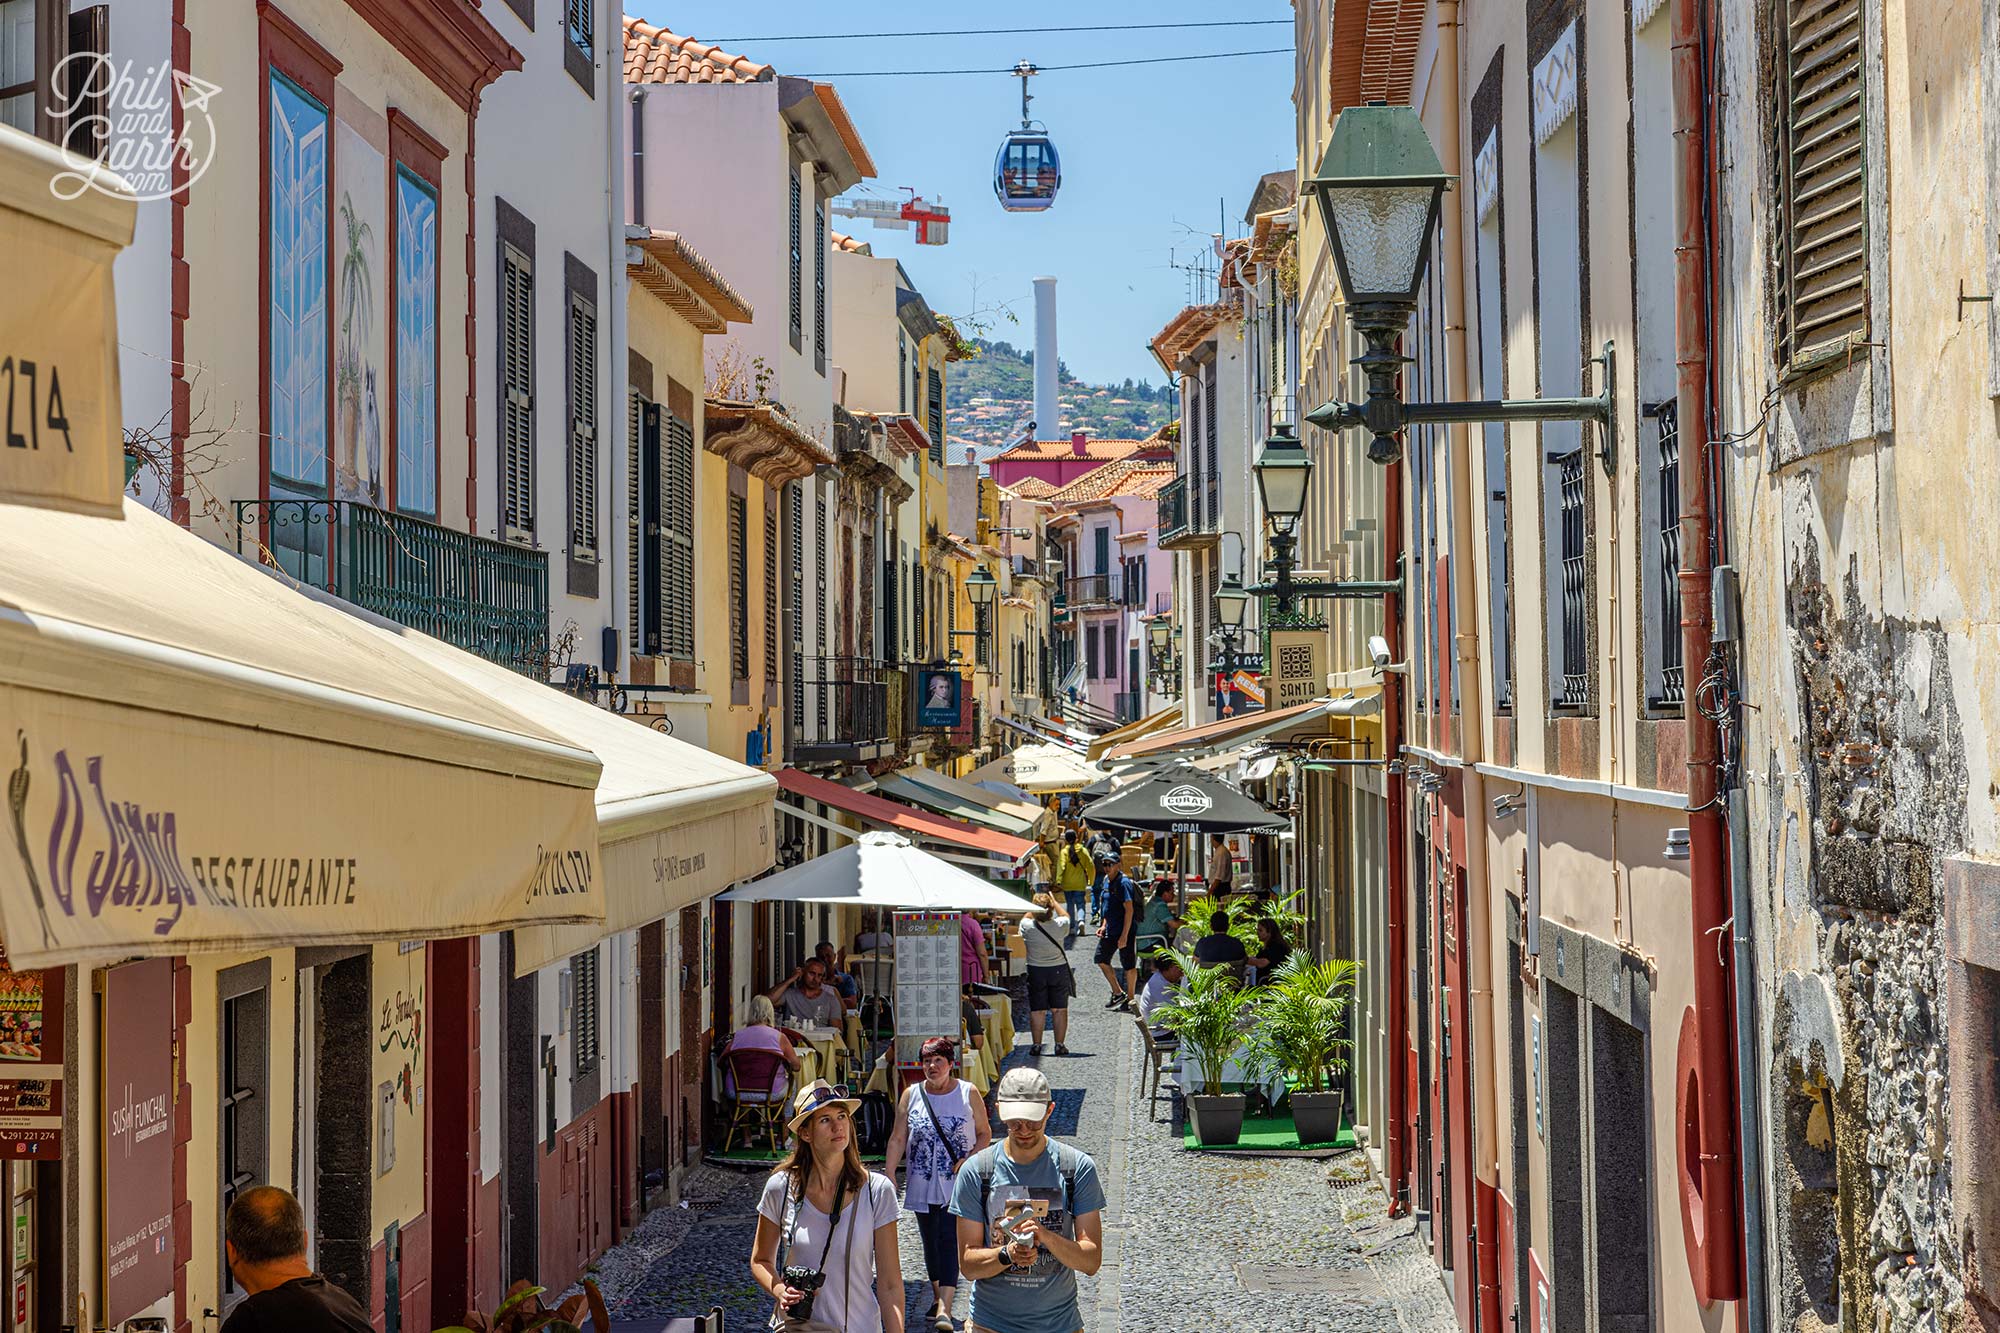 Rua De Santa Maria is packed with restaurants and bars Madeira Portugal